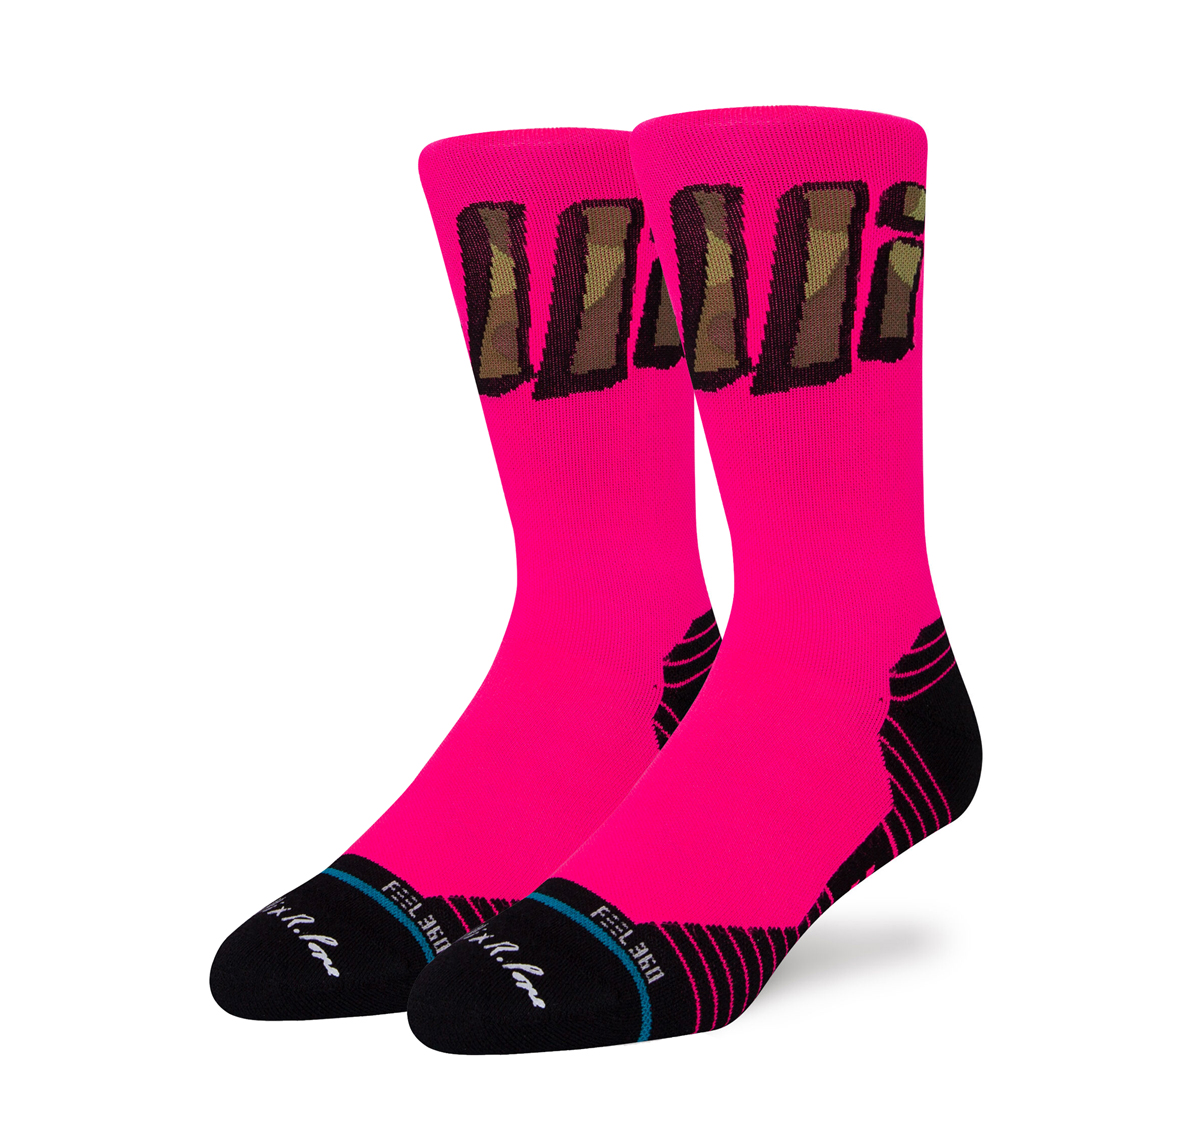 Stance Cinelli - Russ Pope - Performance Infiknit - Neon Pink mood